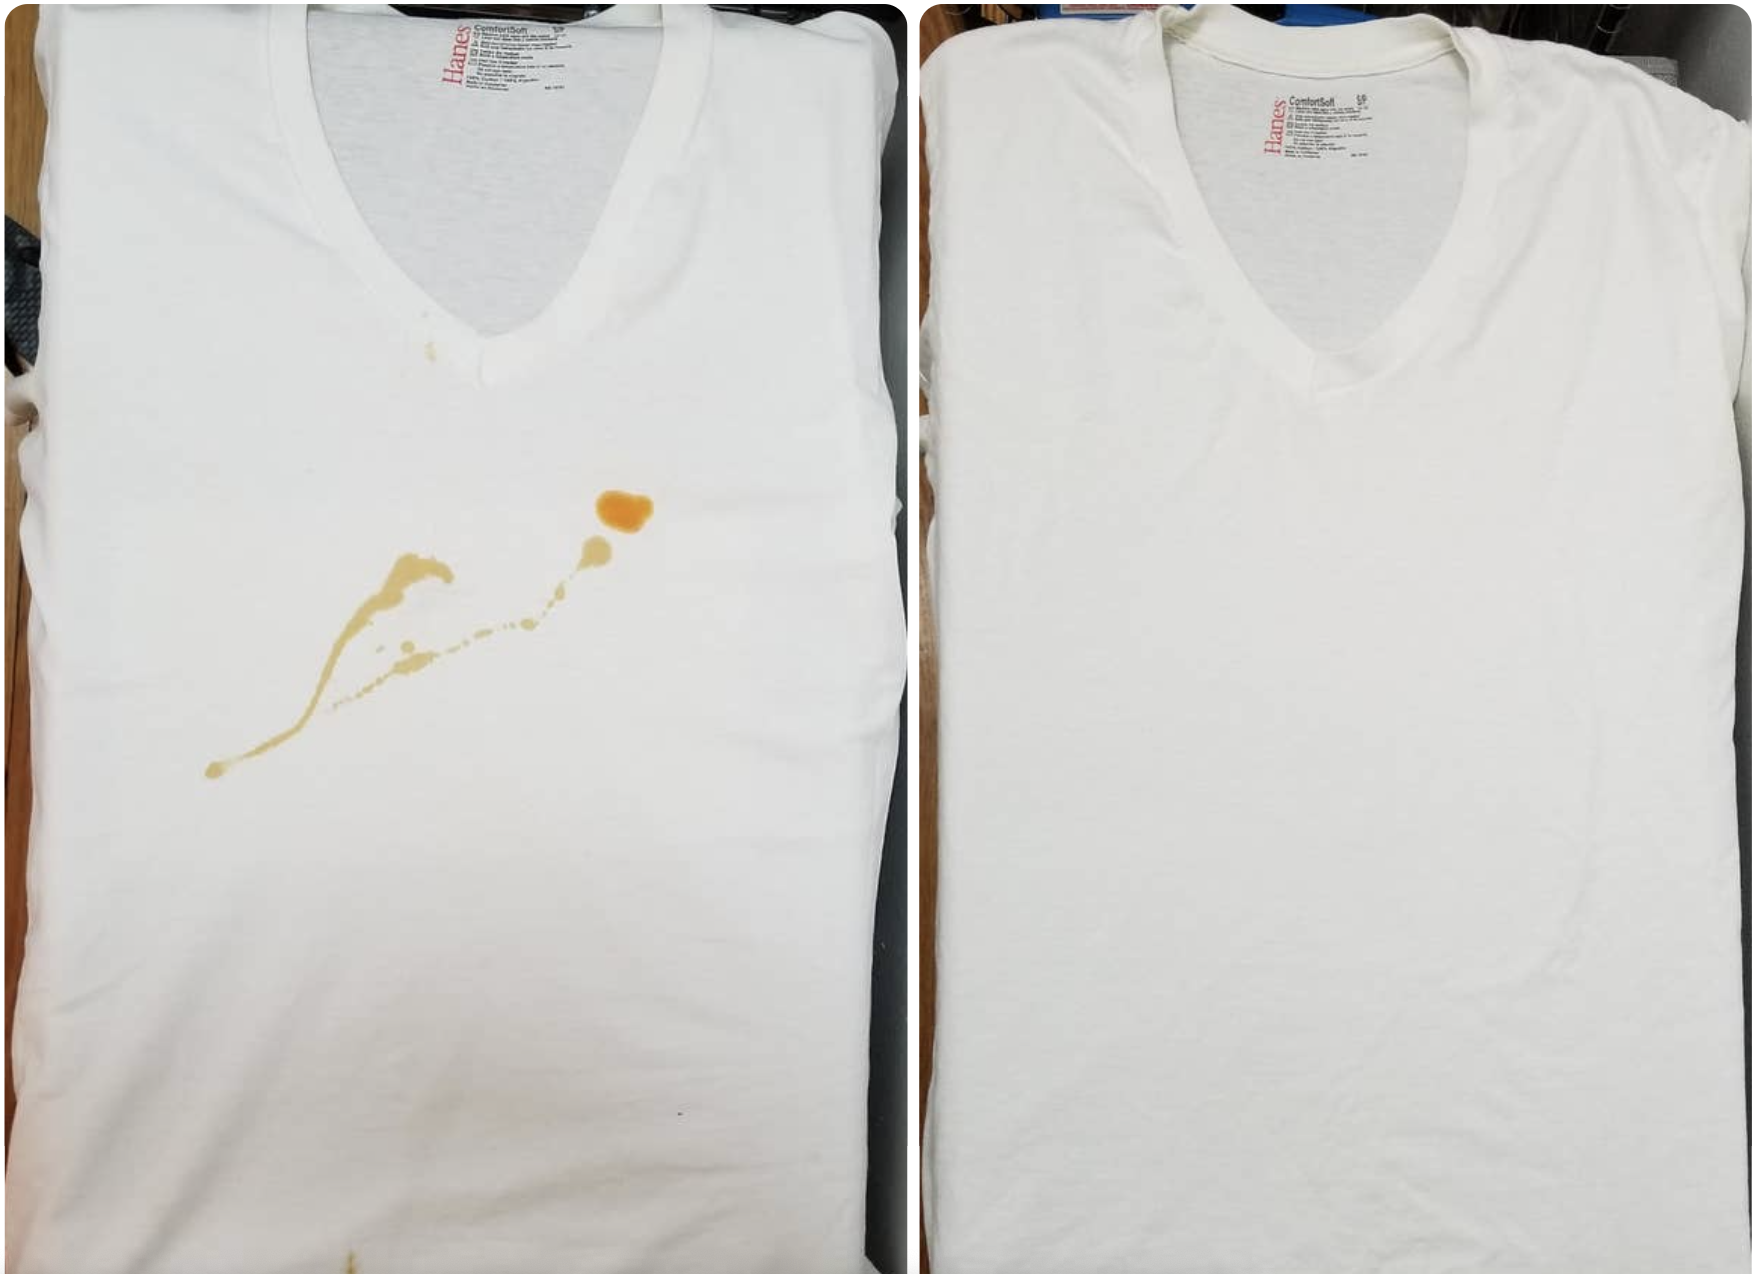 An white shirt with a large orange stain before, and the stain gone after using the stain remover